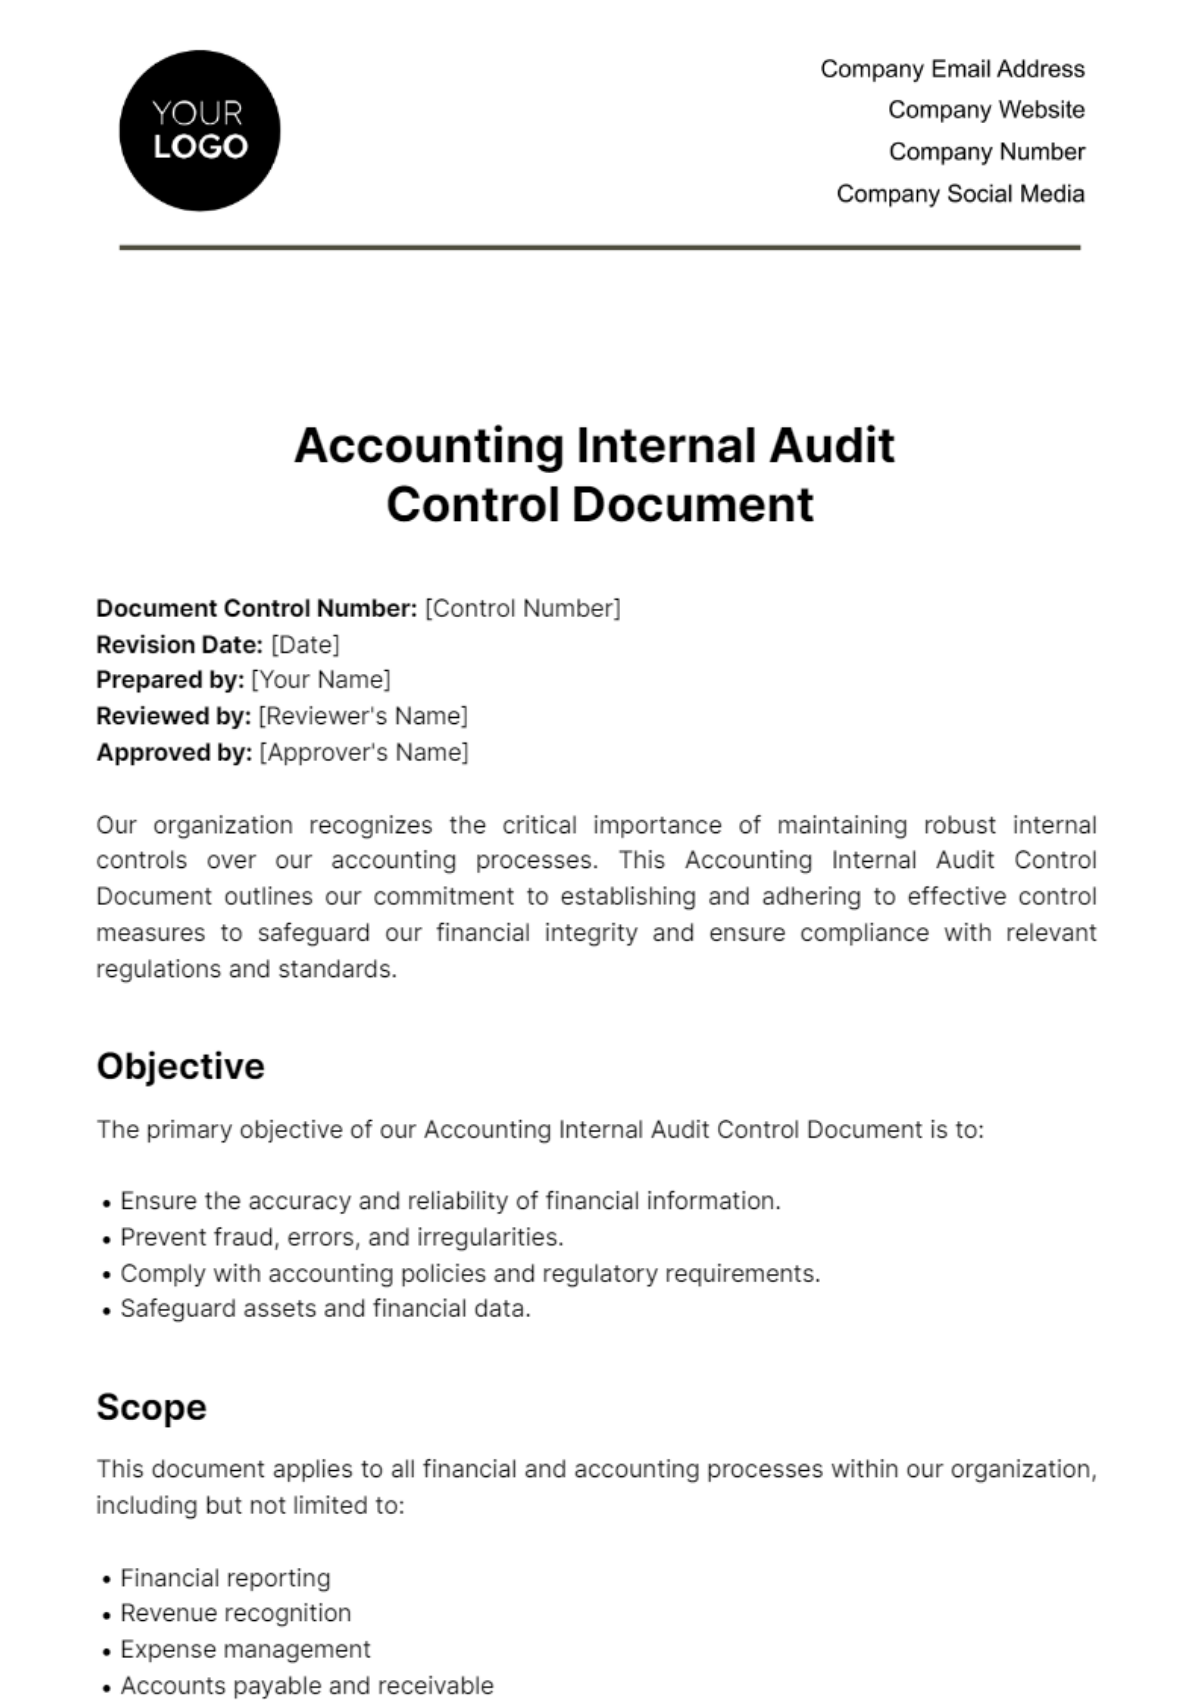 Accounting Internal Audit Control Document Template